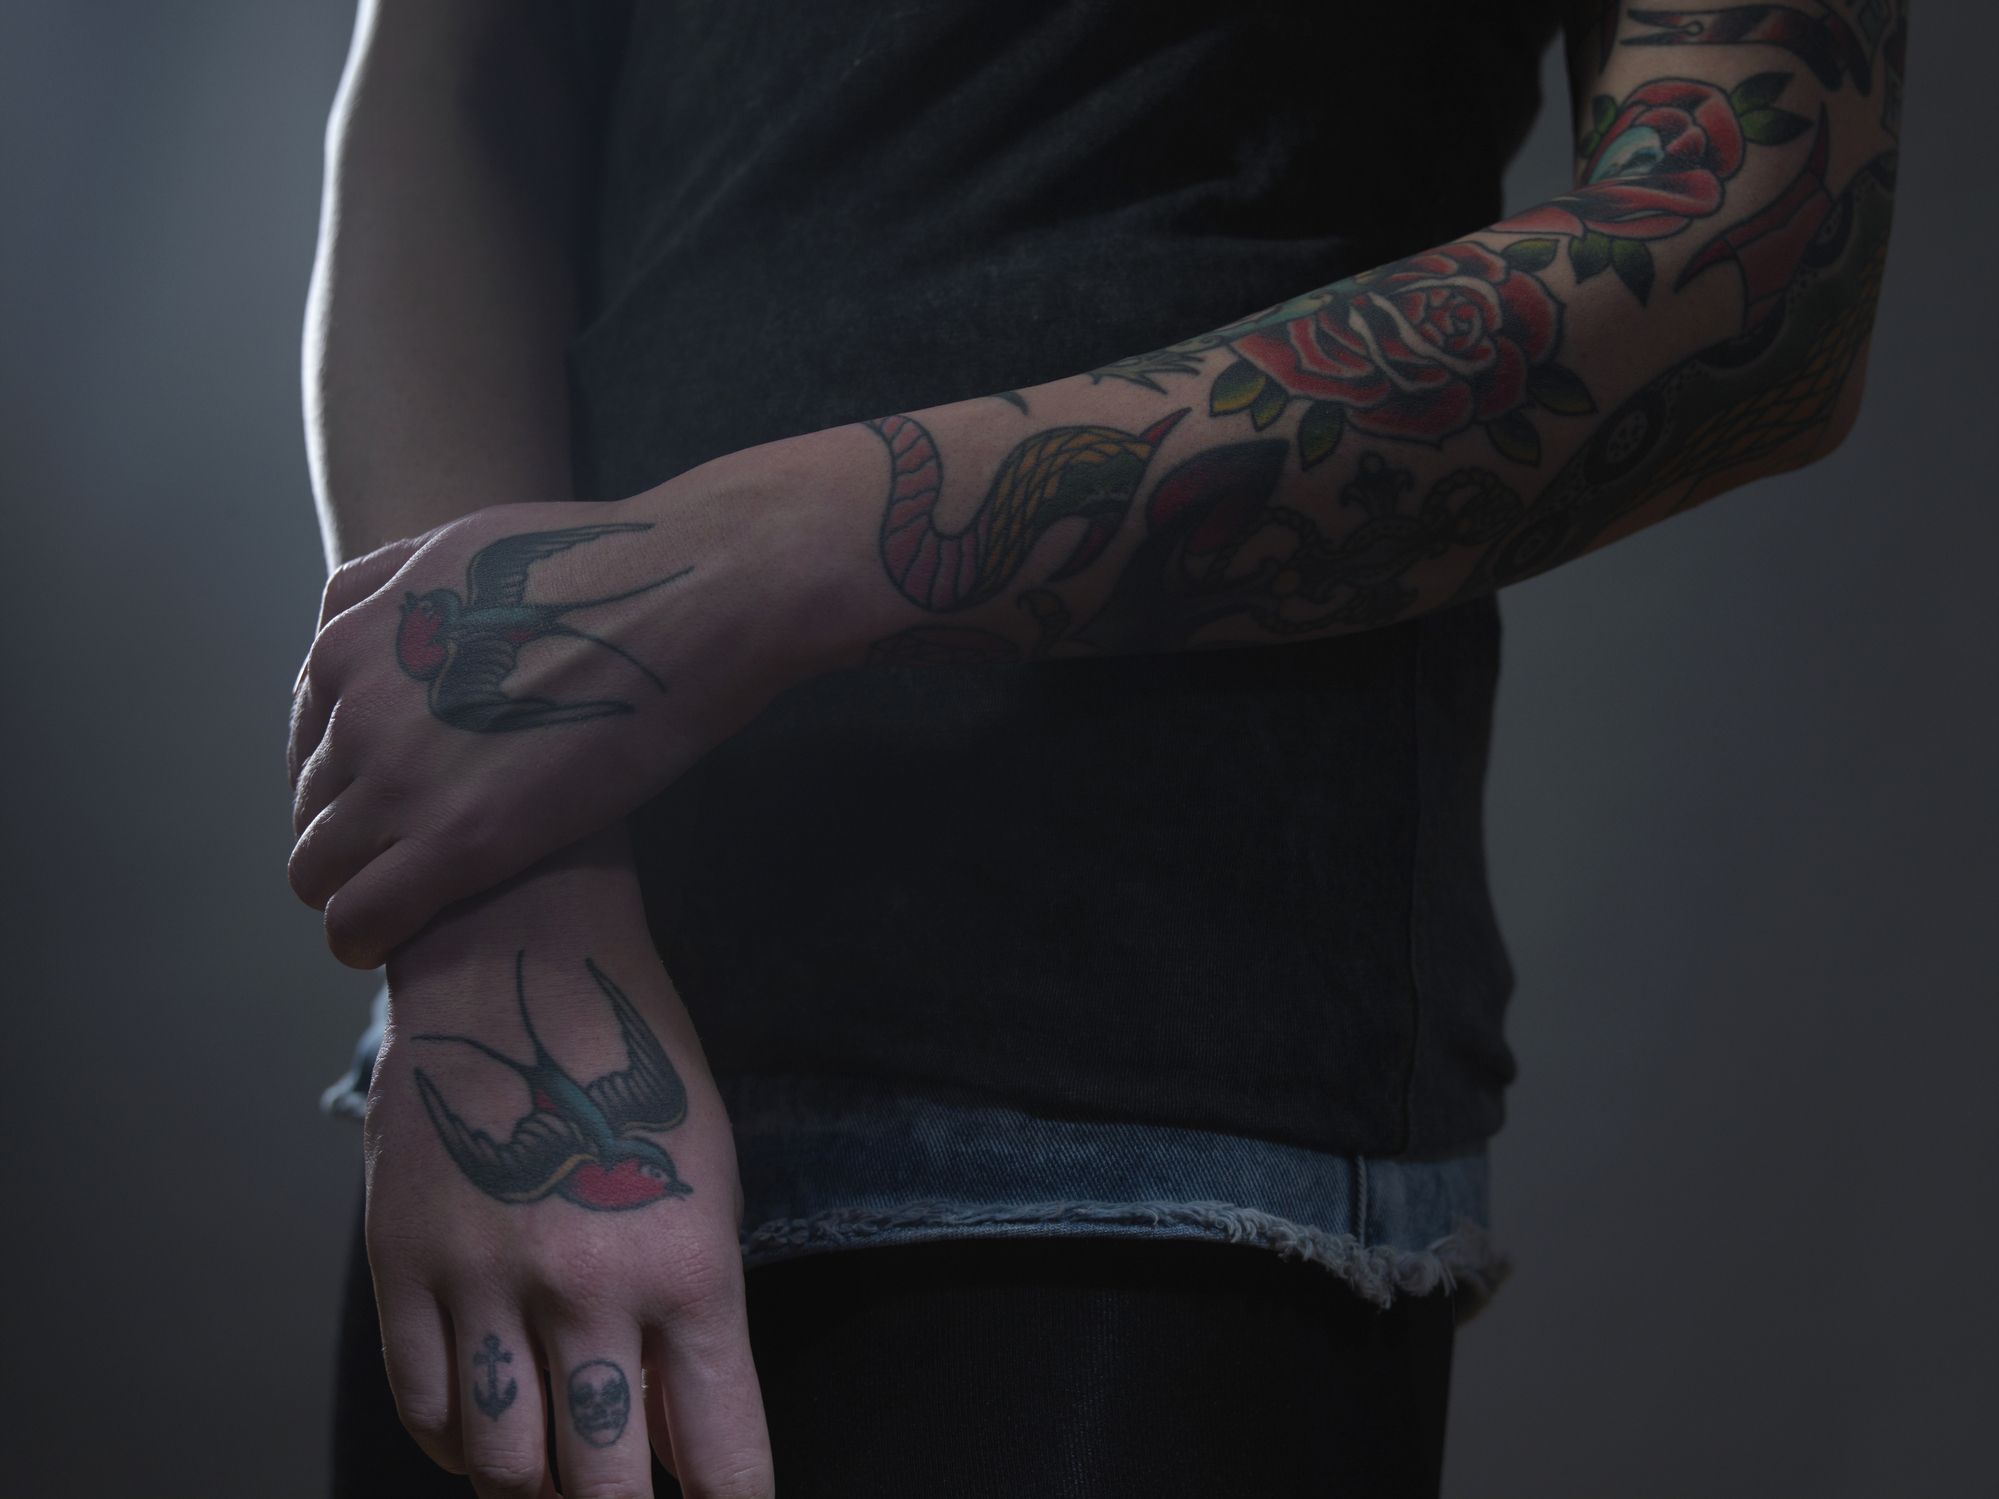 The Best Tattoo Ideas for Men According to a Celebrity Tattoo Artist  GQ